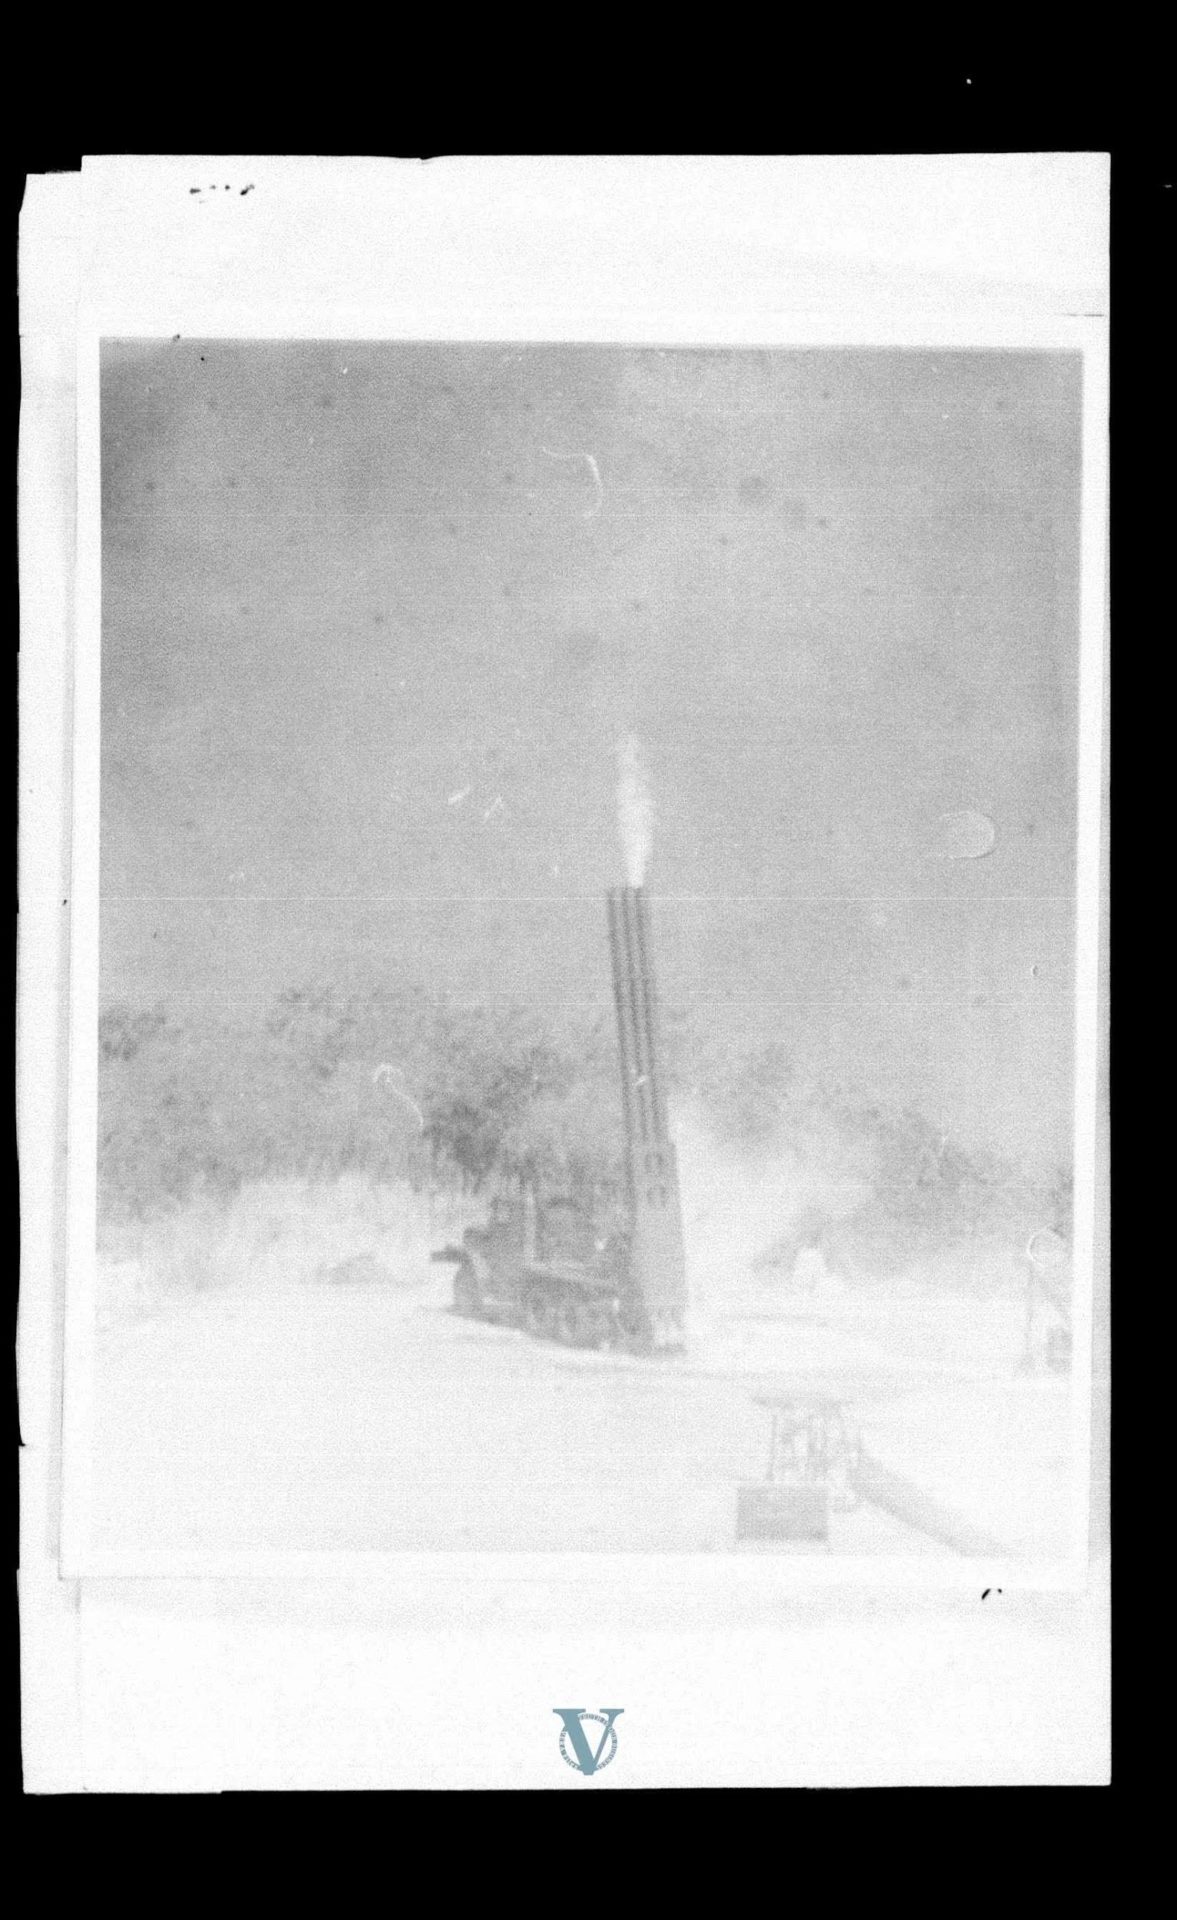 Photos of the May 1973 rocket tests, from the digitized PCGG files. 3/4